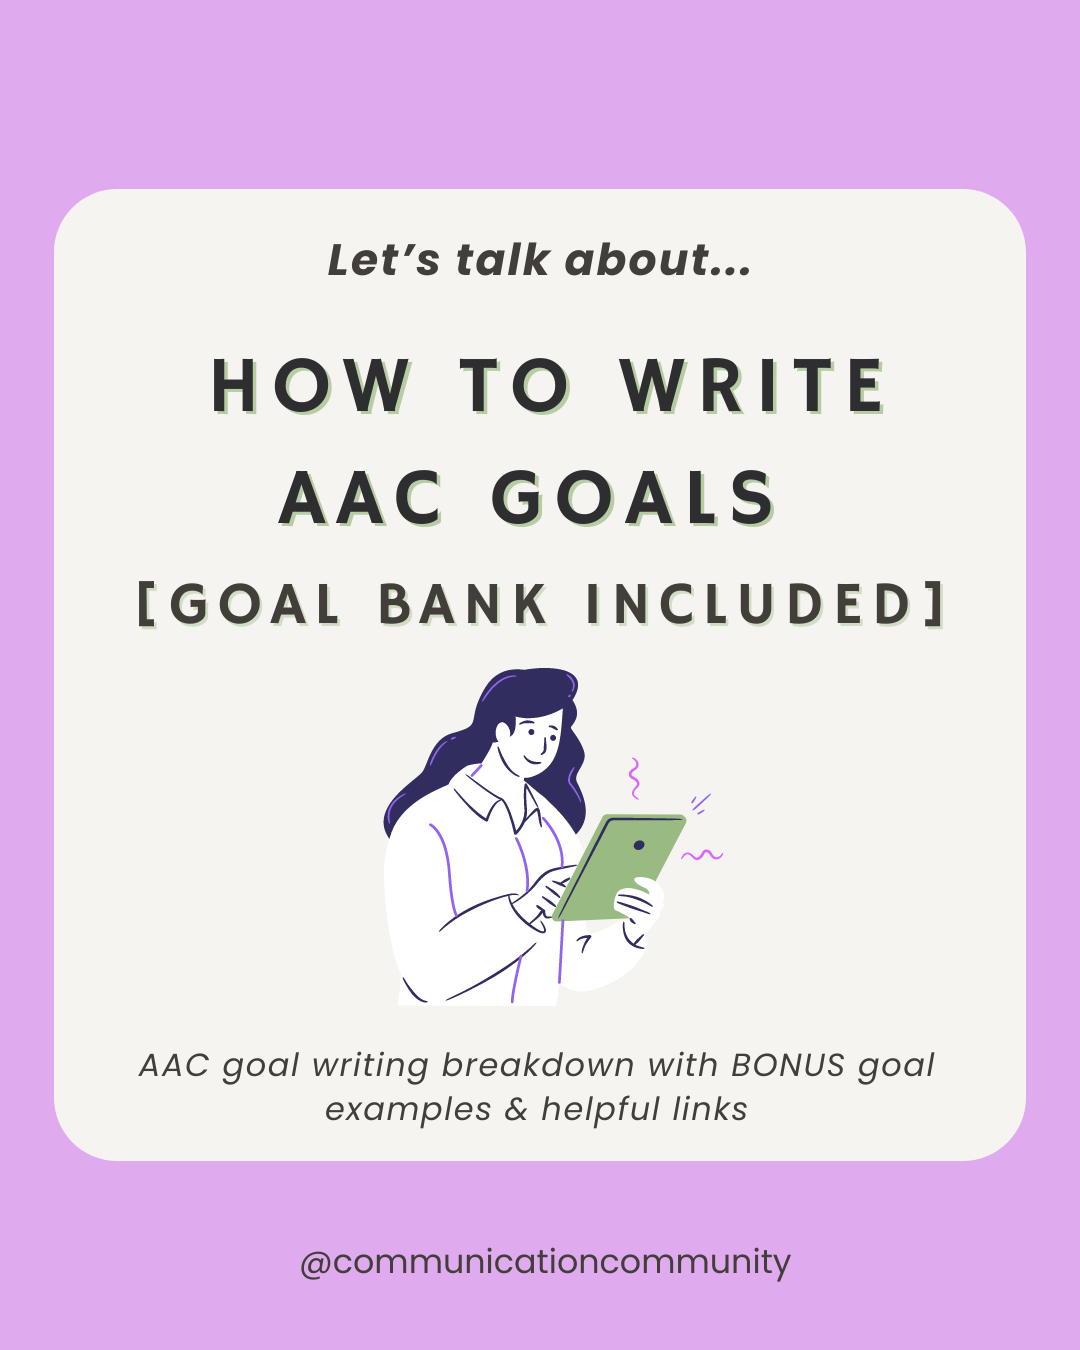 How to Write AAC Goals [with goal bank]